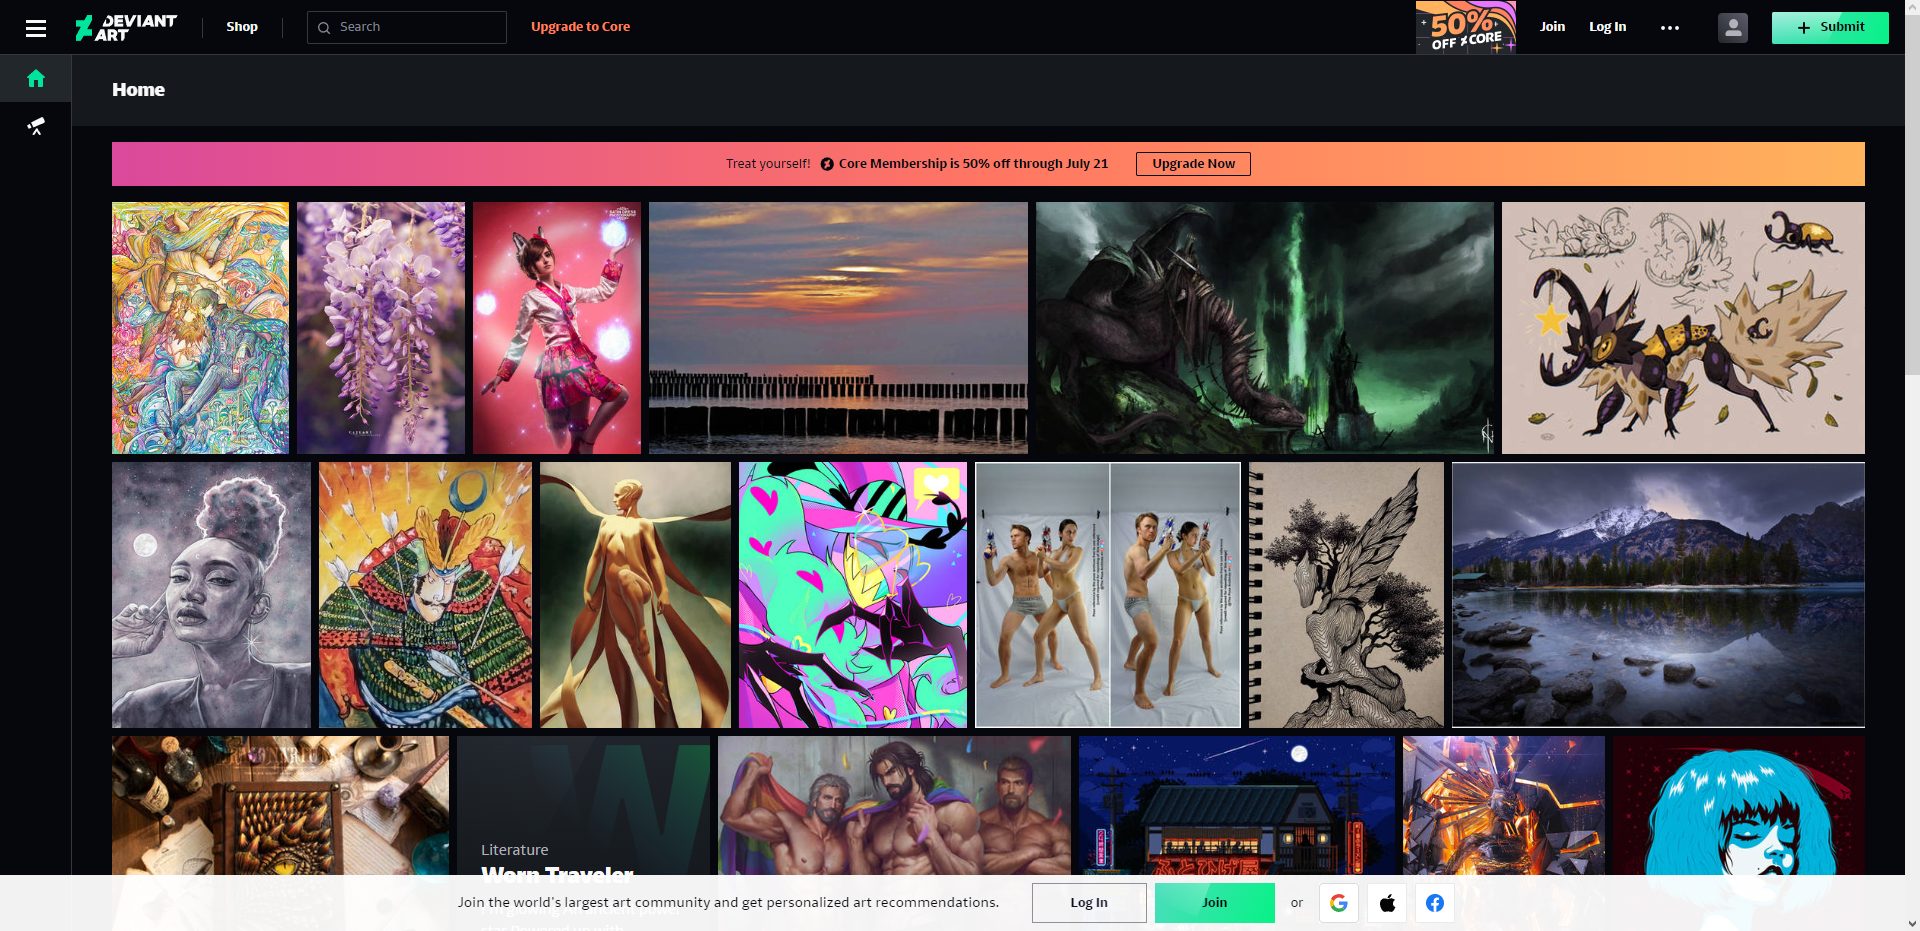 How to find inspiration for generating Midjourney images? Keep reading and learn all the platforms, such as Midjourney Showcase, Deviant Art, etc